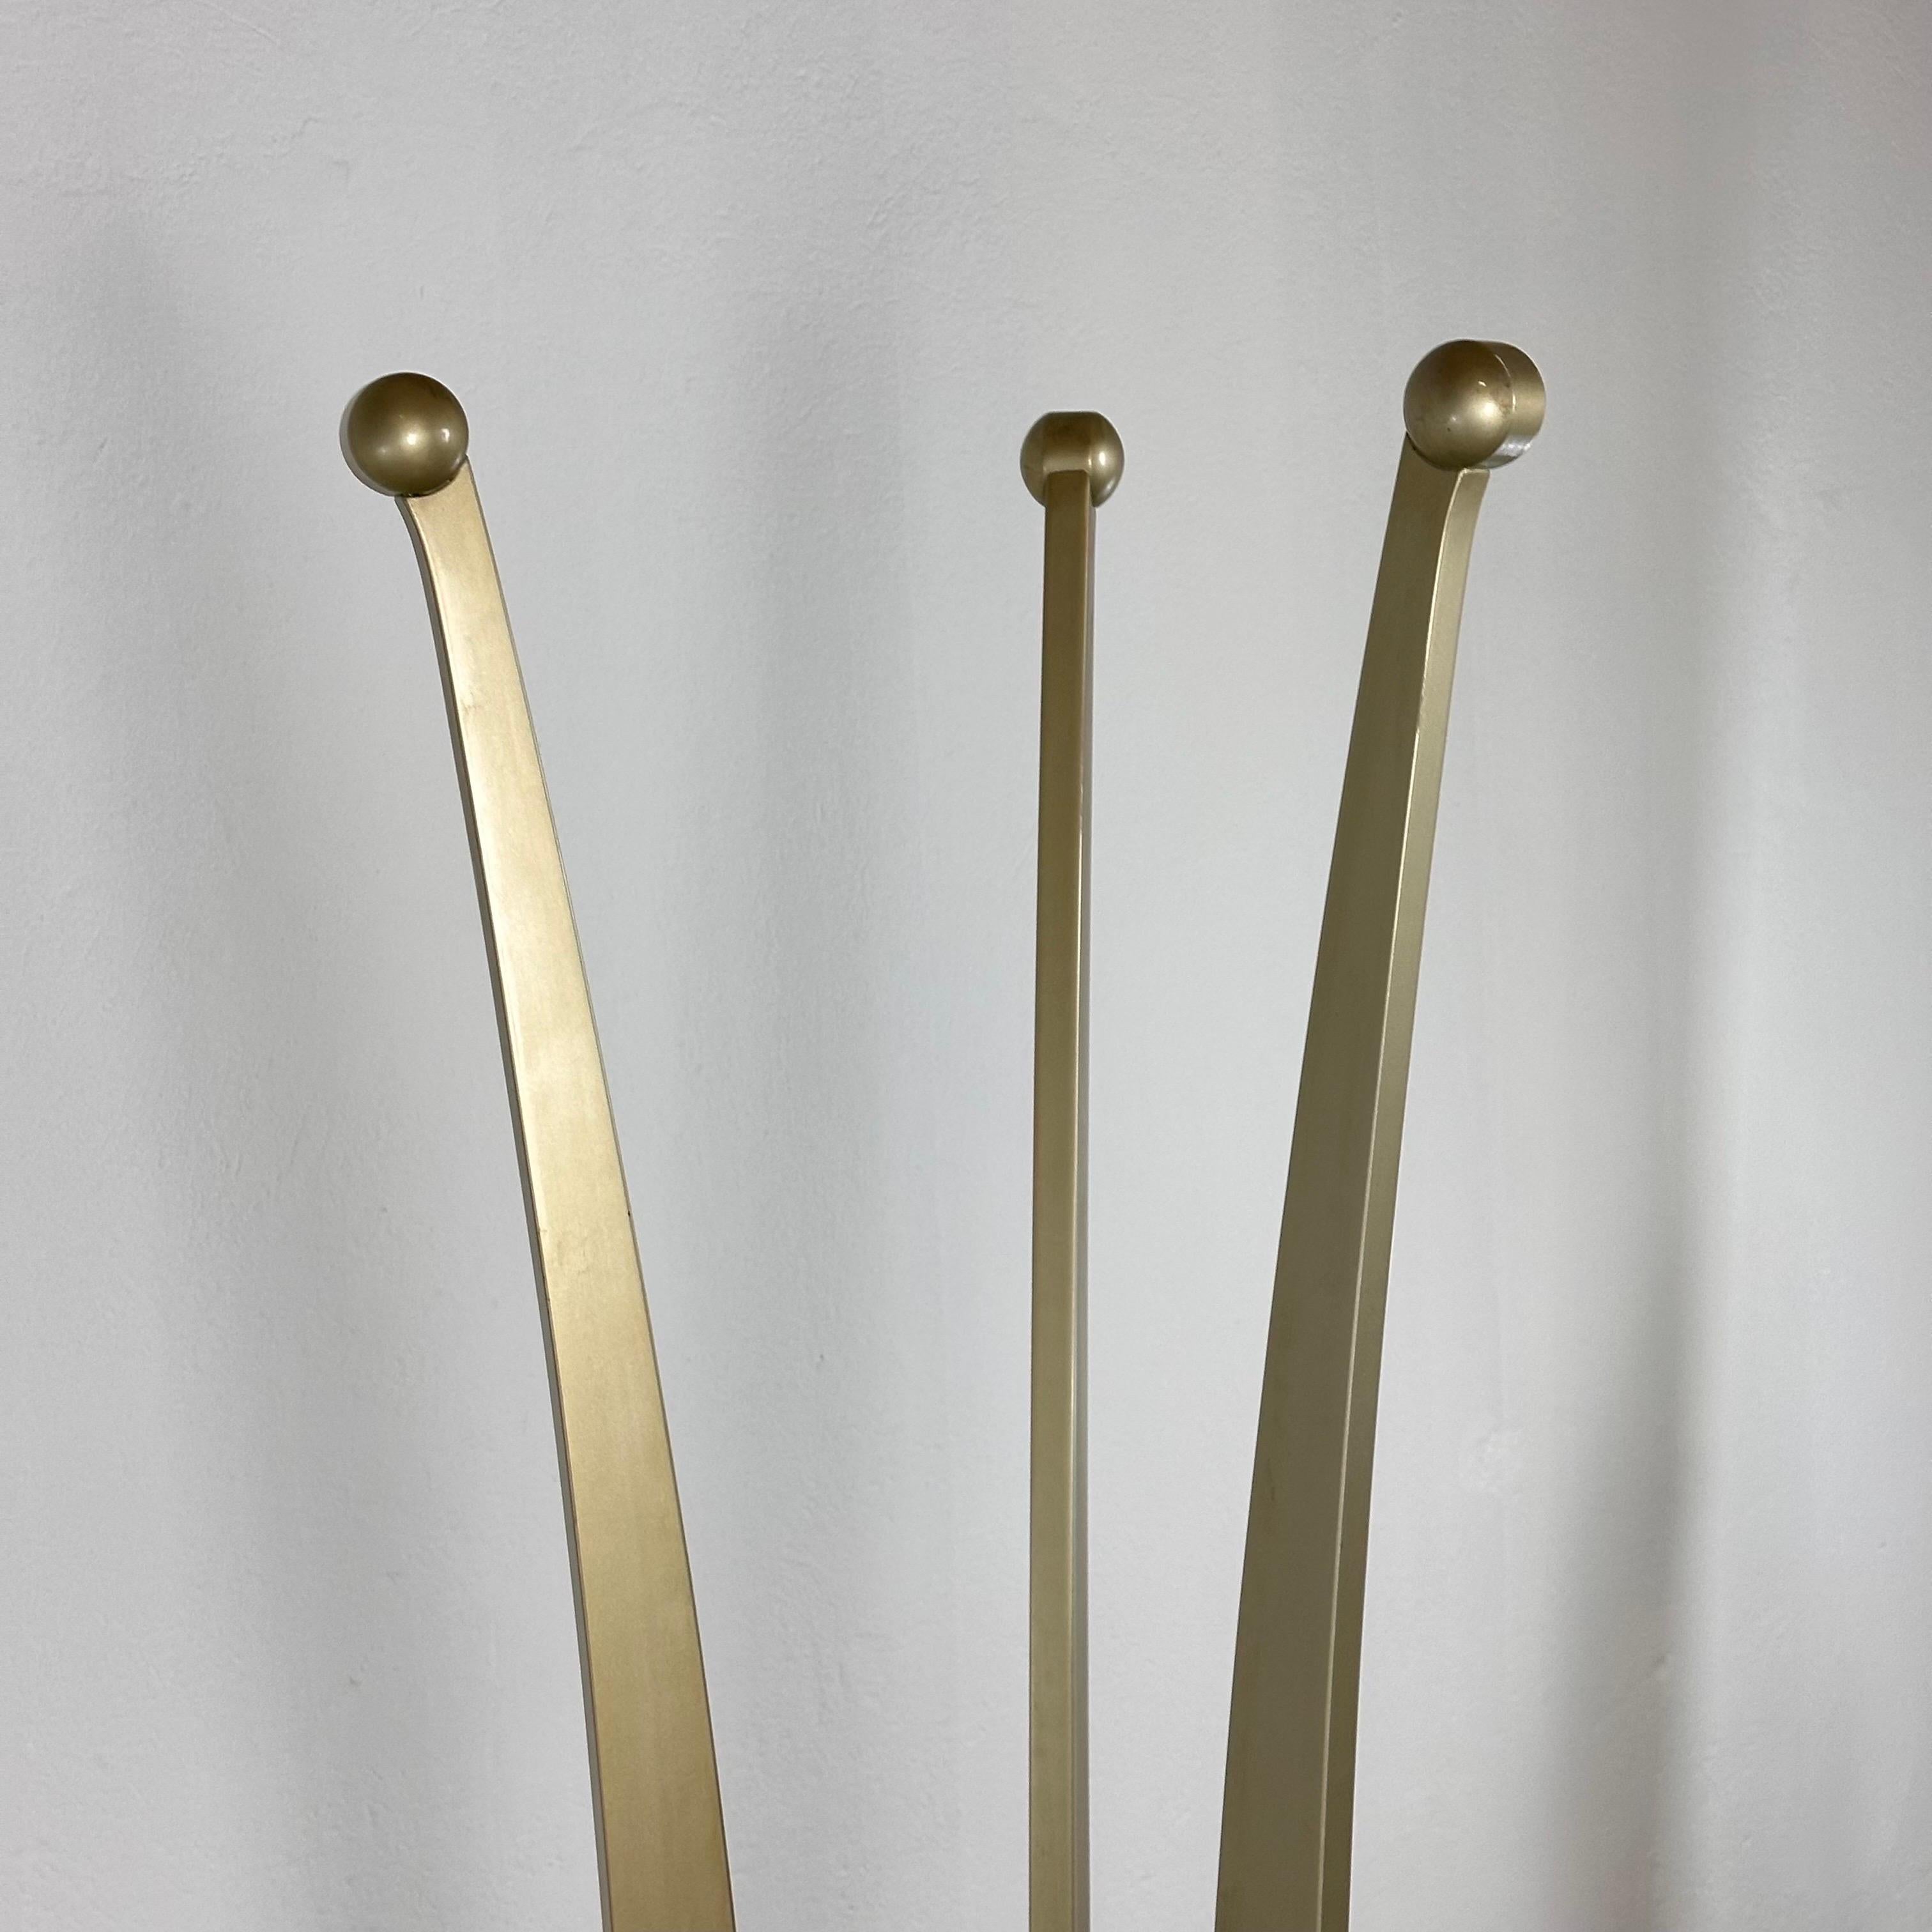 Archizoom 'Orchidea' Coat Stand by Massimo Morozzi, 1980s For Sale 1